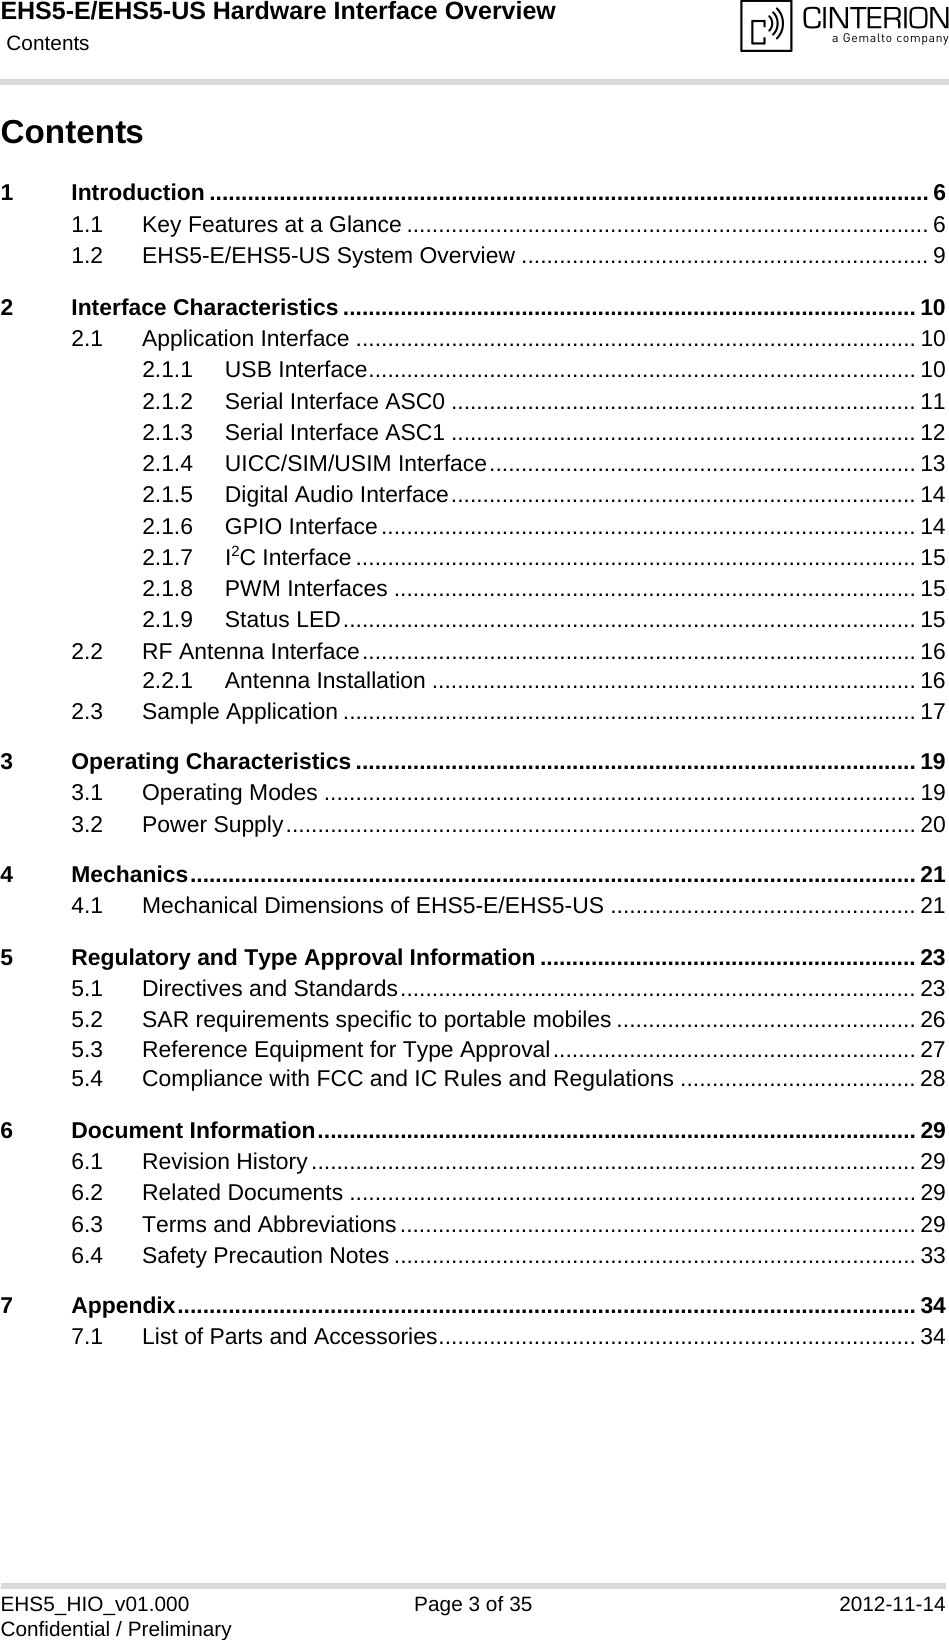 EHS5-E/EHS5-US Hardware Interface Overview Contents35EHS5_HIO_v01.000 Page 3 of 35 2012-11-14Confidential / PreliminaryContents1 Introduction ................................................................................................................. 61.1 Key Features at a Glance .................................................................................. 61.2 EHS5-E/EHS5-US System Overview ................................................................ 92 Interface Characteristics .......................................................................................... 102.1 Application Interface ........................................................................................ 102.1.1 USB Interface...................................................................................... 102.1.2 Serial Interface ASC0 ......................................................................... 112.1.3 Serial Interface ASC1 ......................................................................... 122.1.4 UICC/SIM/USIM Interface................................................................... 132.1.5 Digital Audio Interface......................................................................... 142.1.6 GPIO Interface.................................................................................... 142.1.7 I2C Interface ........................................................................................ 152.1.8 PWM Interfaces .................................................................................. 152.1.9 Status LED.......................................................................................... 152.2 RF Antenna Interface....................................................................................... 162.2.1 Antenna Installation ............................................................................ 162.3 Sample Application .......................................................................................... 173 Operating Characteristics ........................................................................................ 193.1 Operating Modes ............................................................................................. 193.2 Power Supply................................................................................................... 204 Mechanics.................................................................................................................. 214.1 Mechanical Dimensions of EHS5-E/EHS5-US ................................................ 215 Regulatory and Type Approval Information ........................................................... 235.1 Directives and Standards................................................................................. 235.2 SAR requirements specific to portable mobiles ............................................... 265.3 Reference Equipment for Type Approval......................................................... 275.4 Compliance with FCC and IC Rules and Regulations ..................................... 286 Document Information.............................................................................................. 296.1 Revision History............................................................................................... 296.2 Related Documents ......................................................................................... 296.3 Terms and Abbreviations................................................................................. 296.4 Safety Precaution Notes .................................................................................. 337 Appendix.................................................................................................................... 347.1 List of Parts and Accessories........................................................................... 34